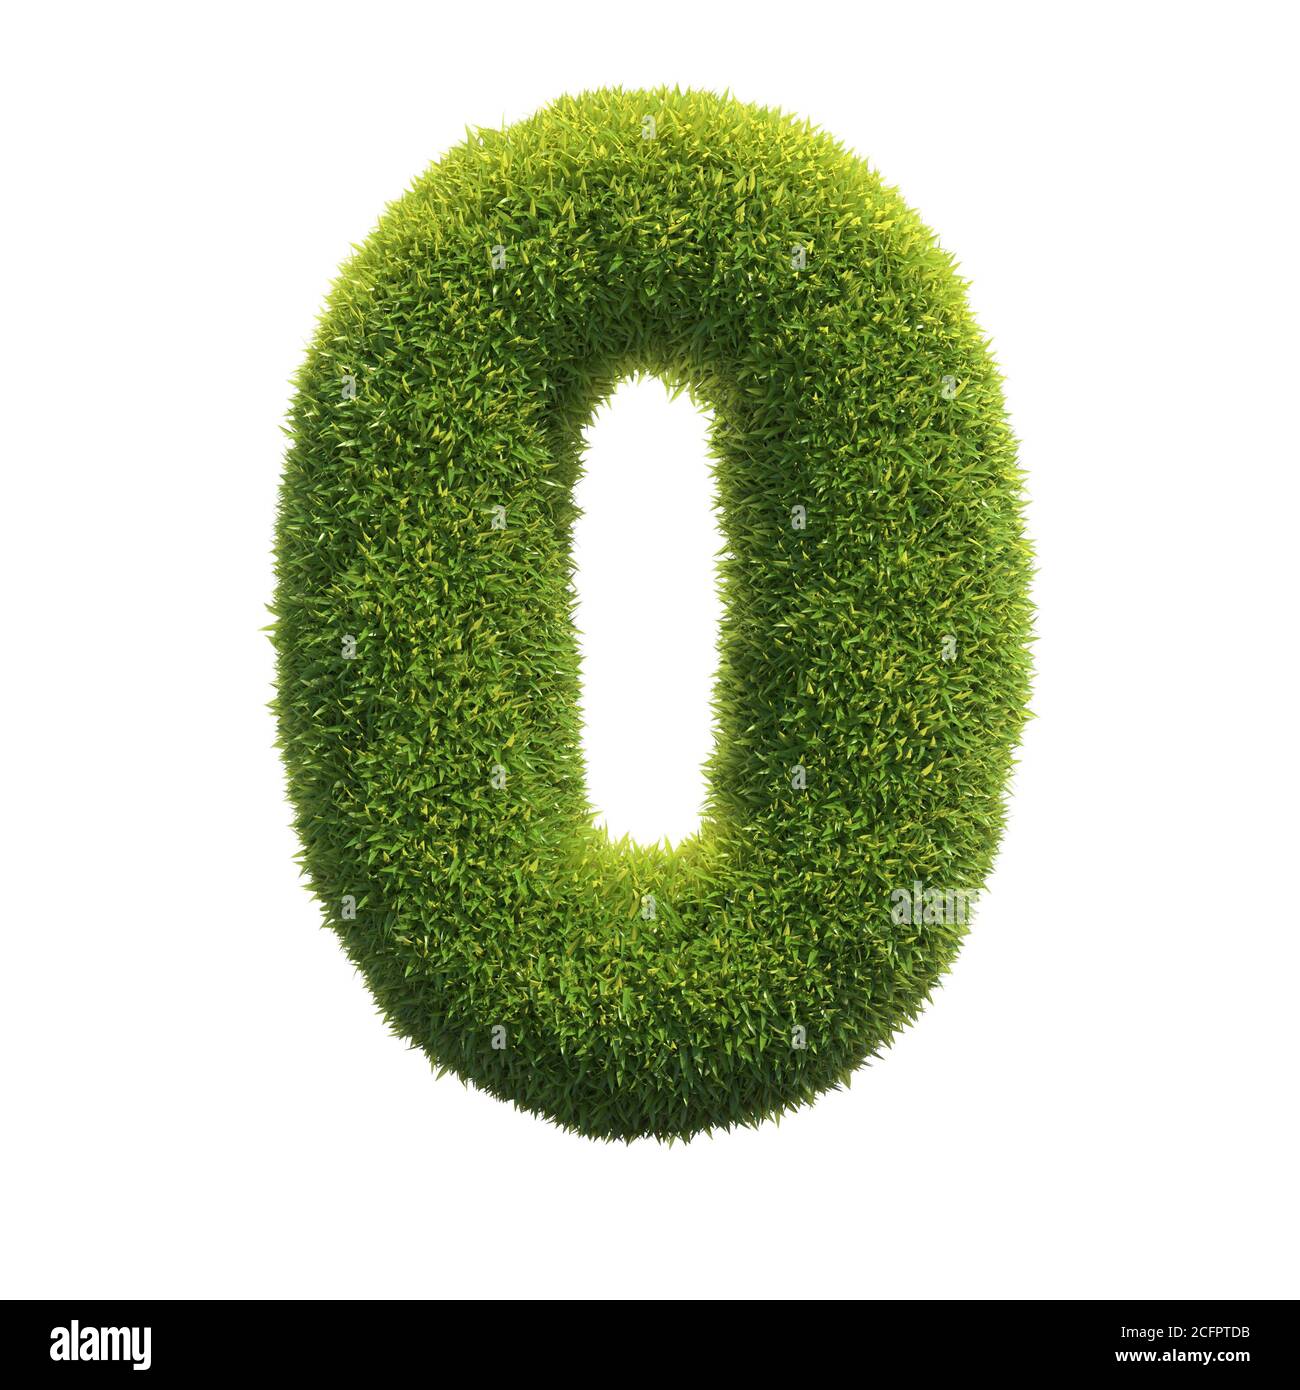 Grass font 3d rendering number 0 Stock Photo